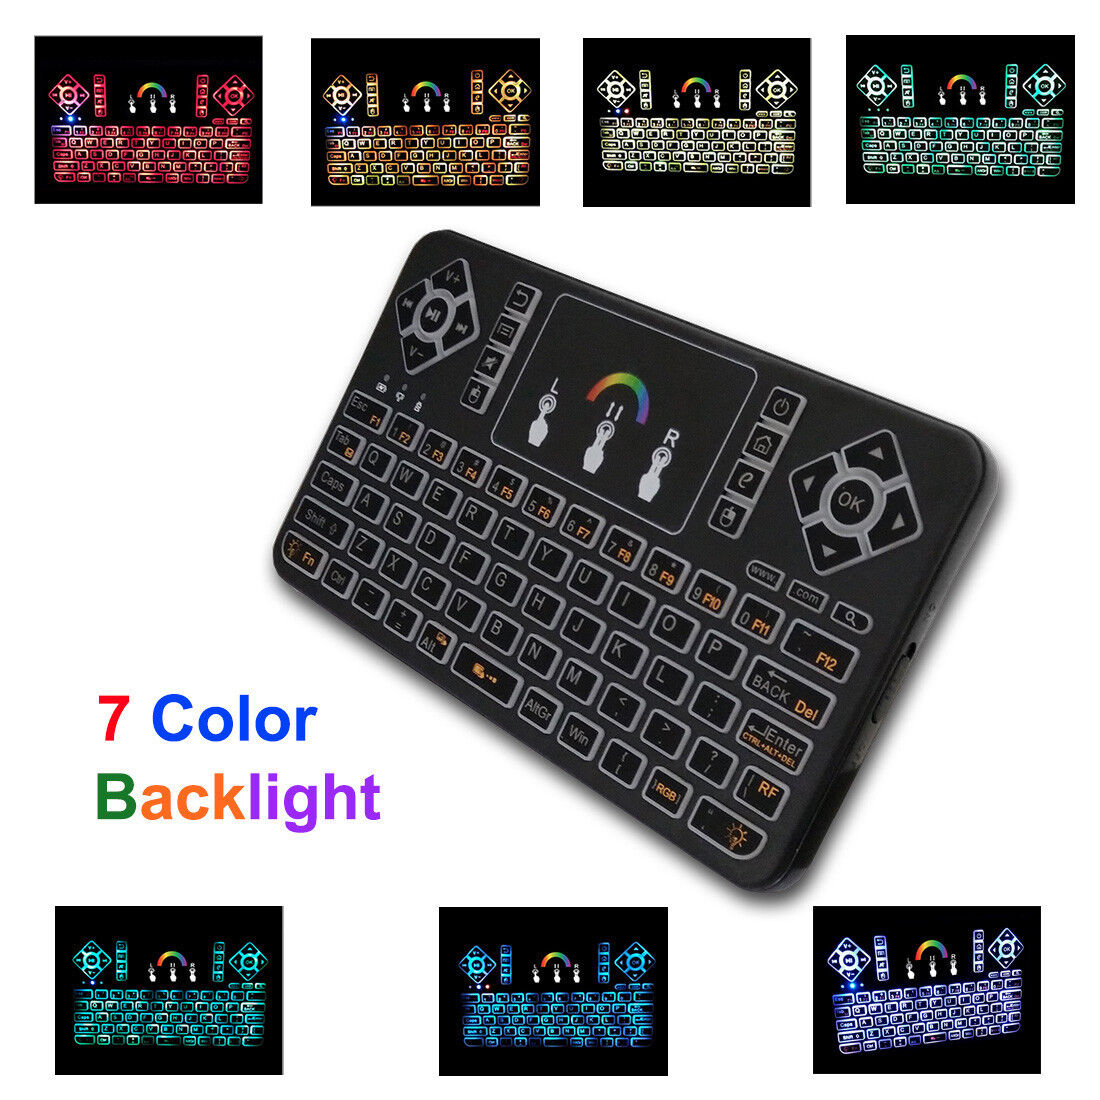 Mini Color RPG Backlight USB Wireless Keyboard Touchpad Mouse Remote Control NEW